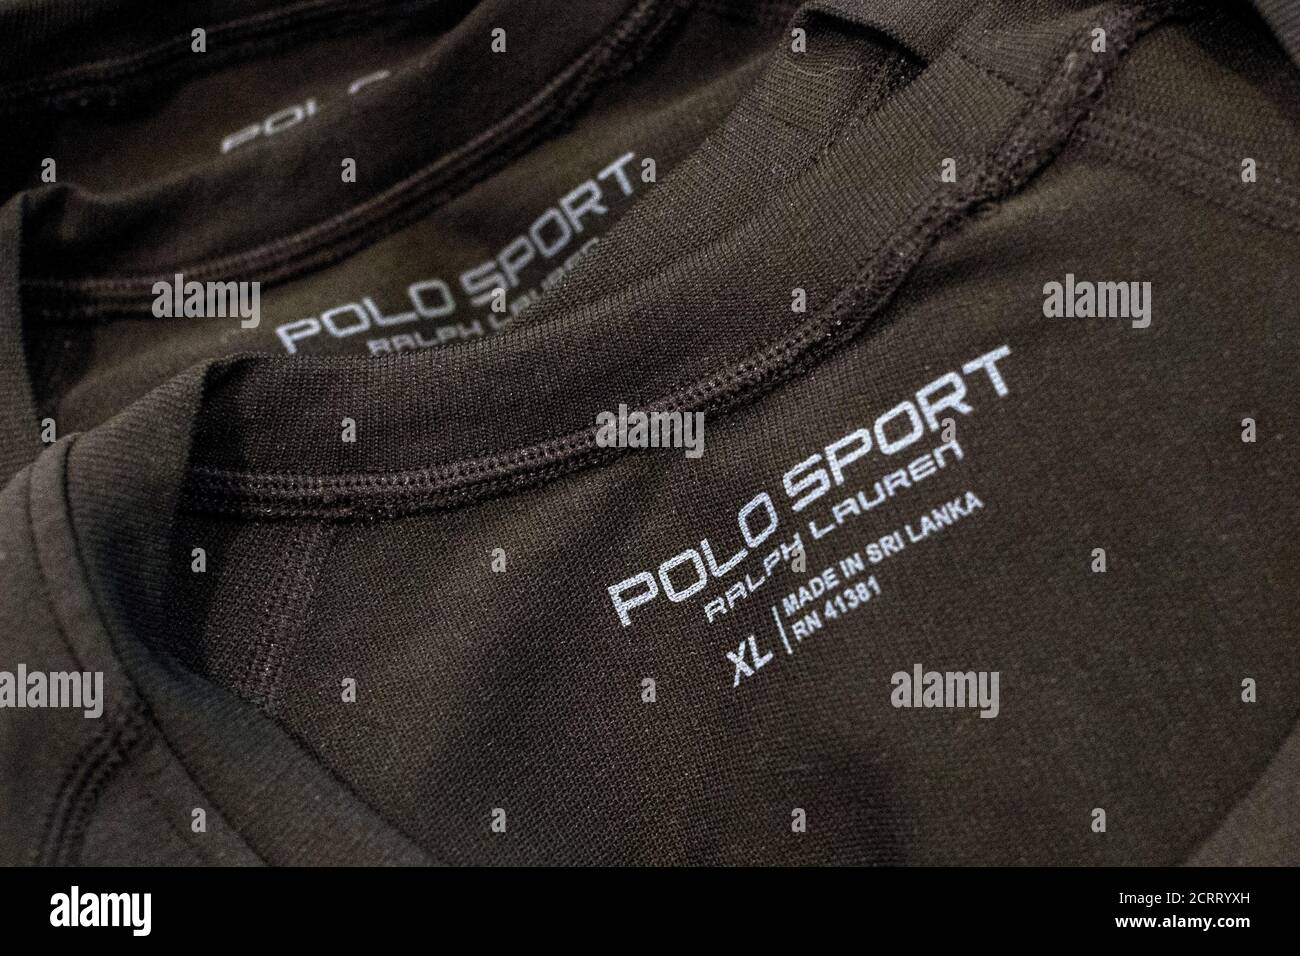 Ralph Lauren's PoloTech shirts, embedded with sensors that read real-time  biometric data, are displayed during a presentation in New York, August 20,  2015. The PoloTech shirt will measure heart rate and calories